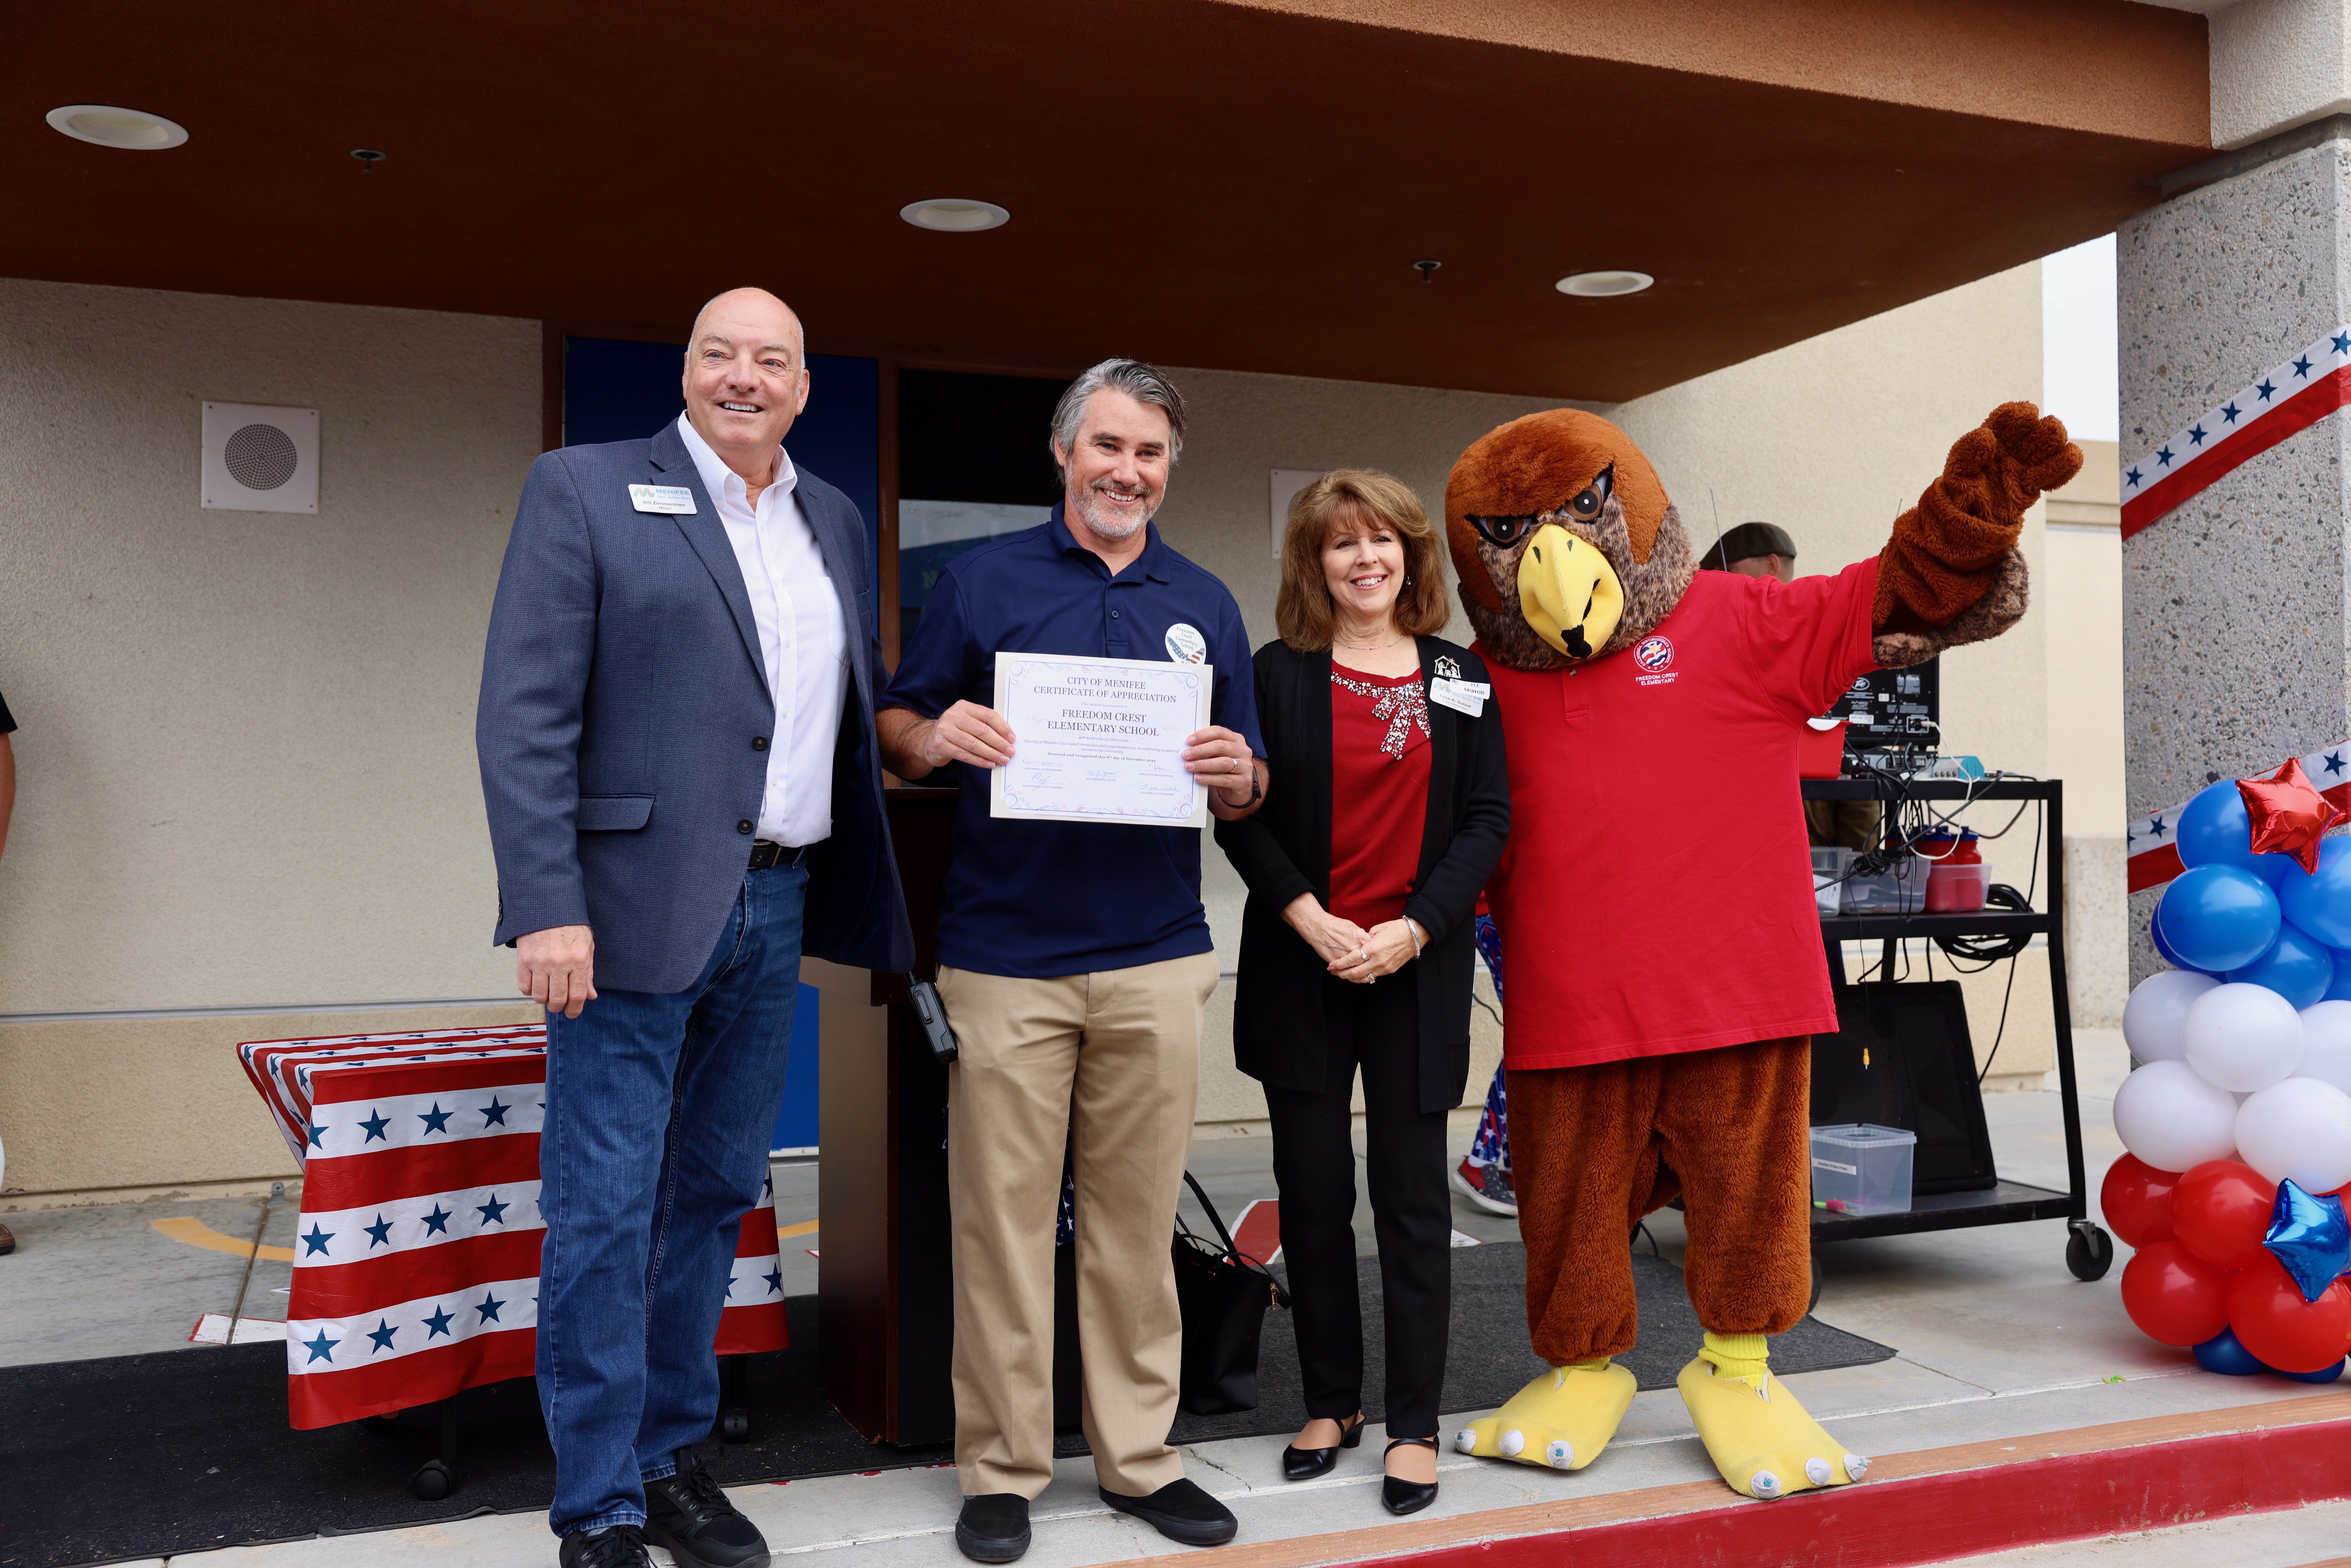 Our Pueblo community residents were honored to recognize our veterans at South  Park Elementary School! #retirement…